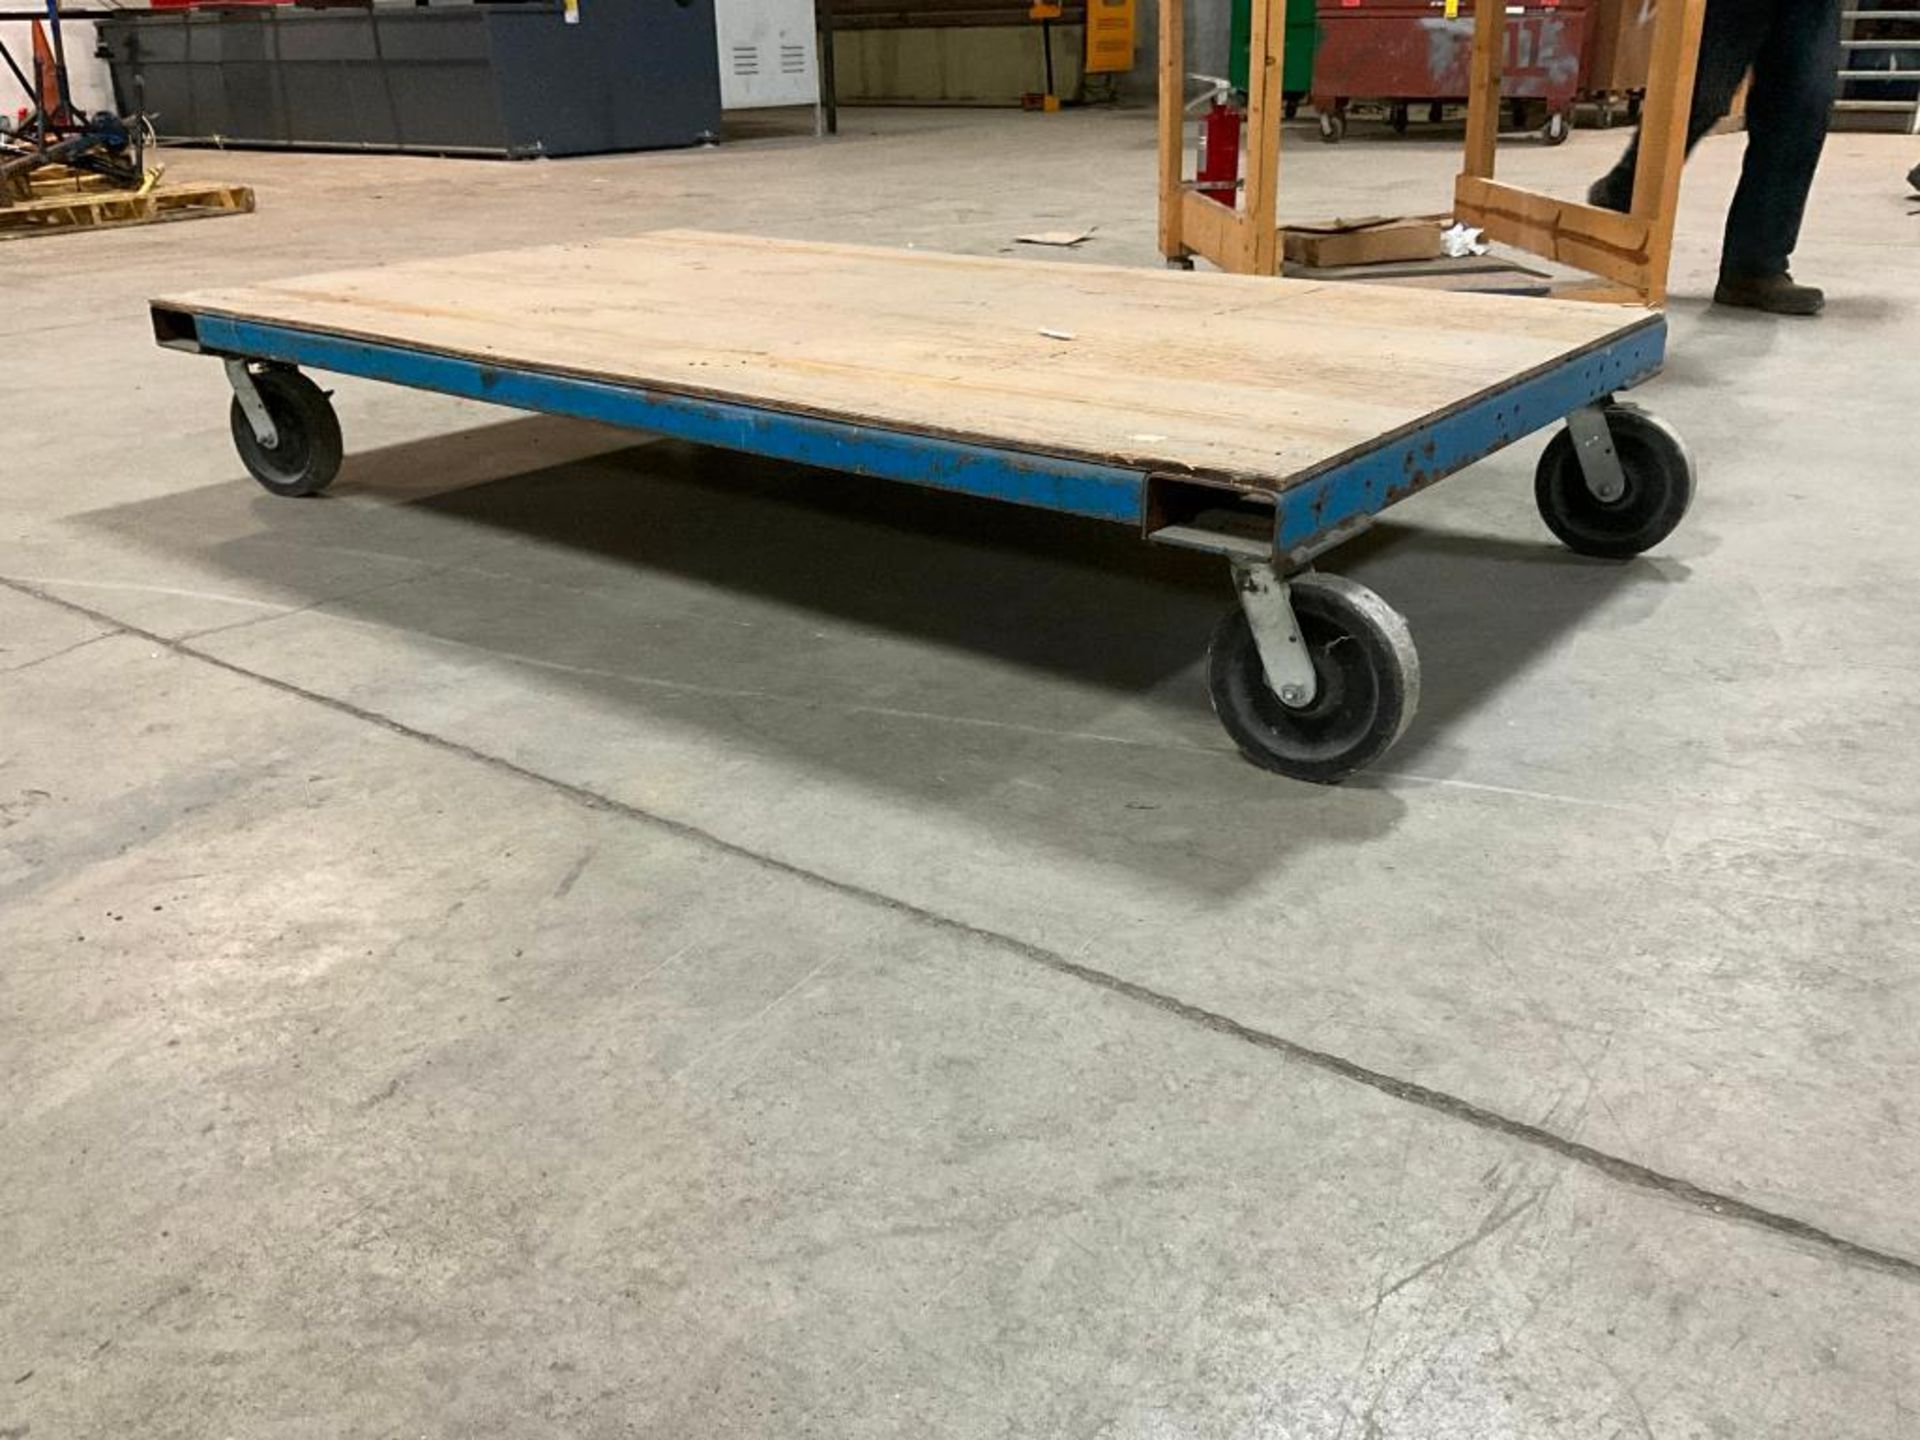 Steel Dolly Wood Deck, 13" H x 77" W x 44" D - Image 3 of 3